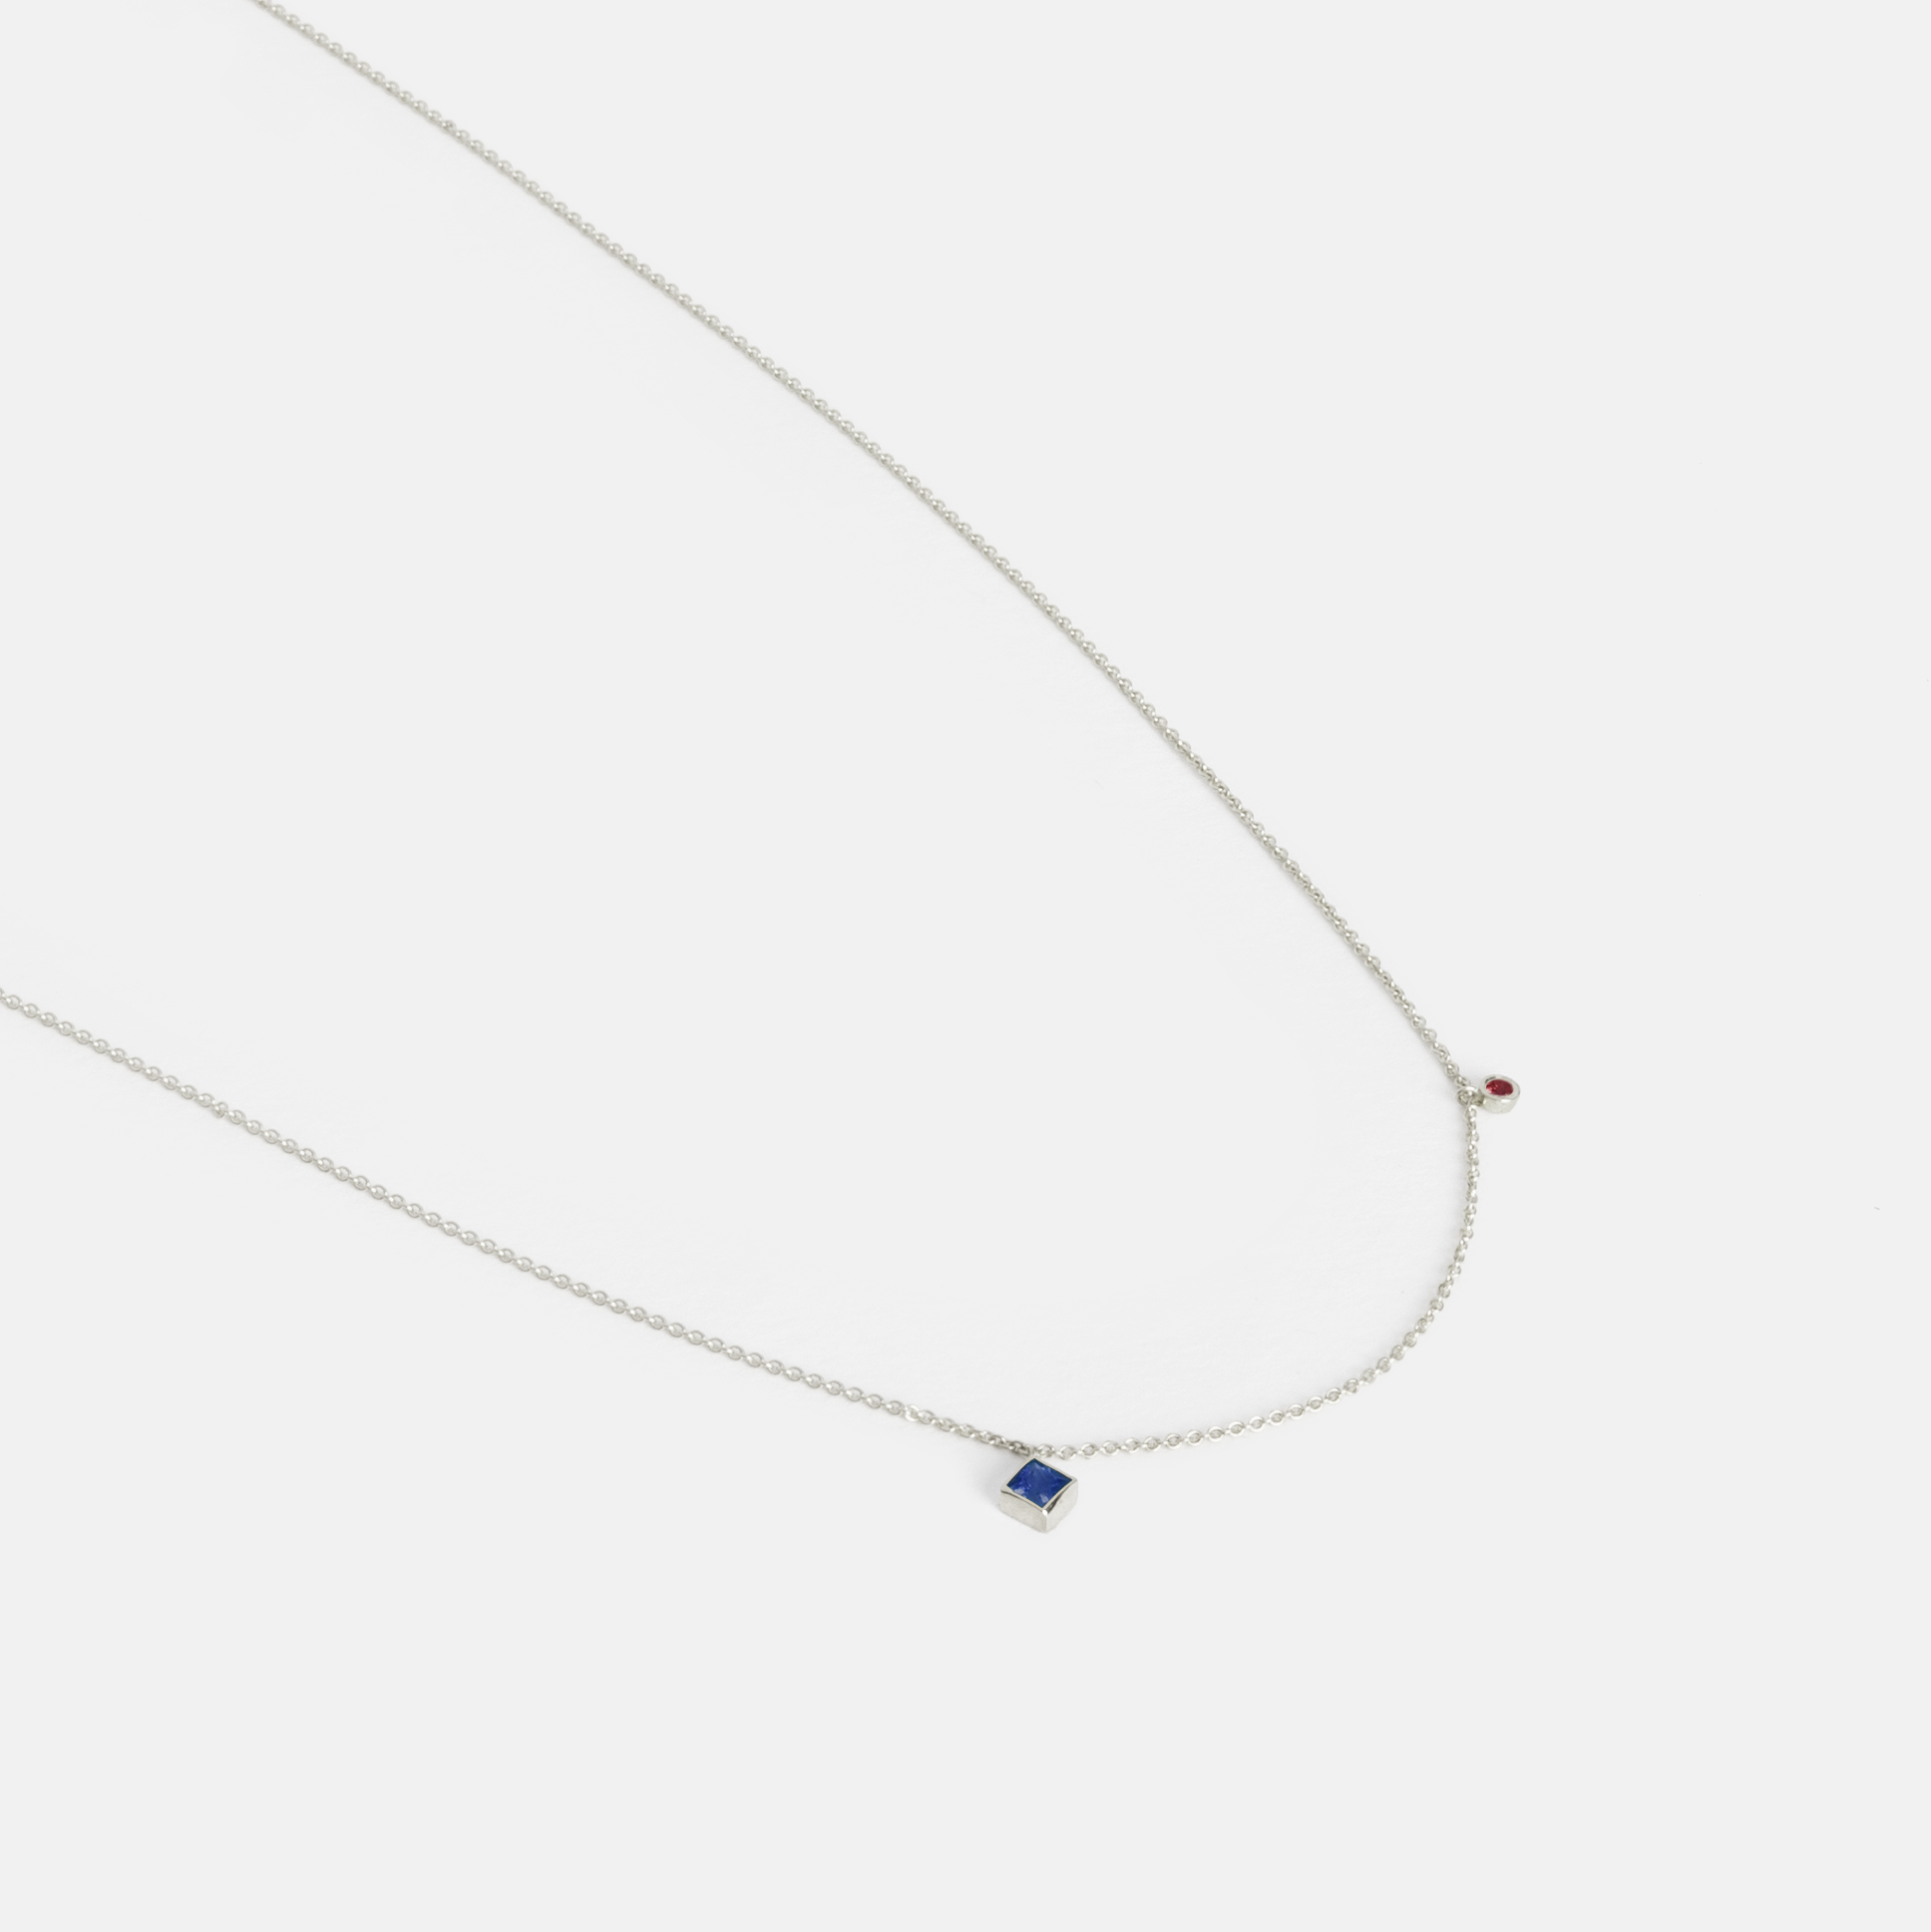  Ibi Thin Necklace in 14k White Gold set with Sapphire and Ruby By SHW Fine Jewelry NYC